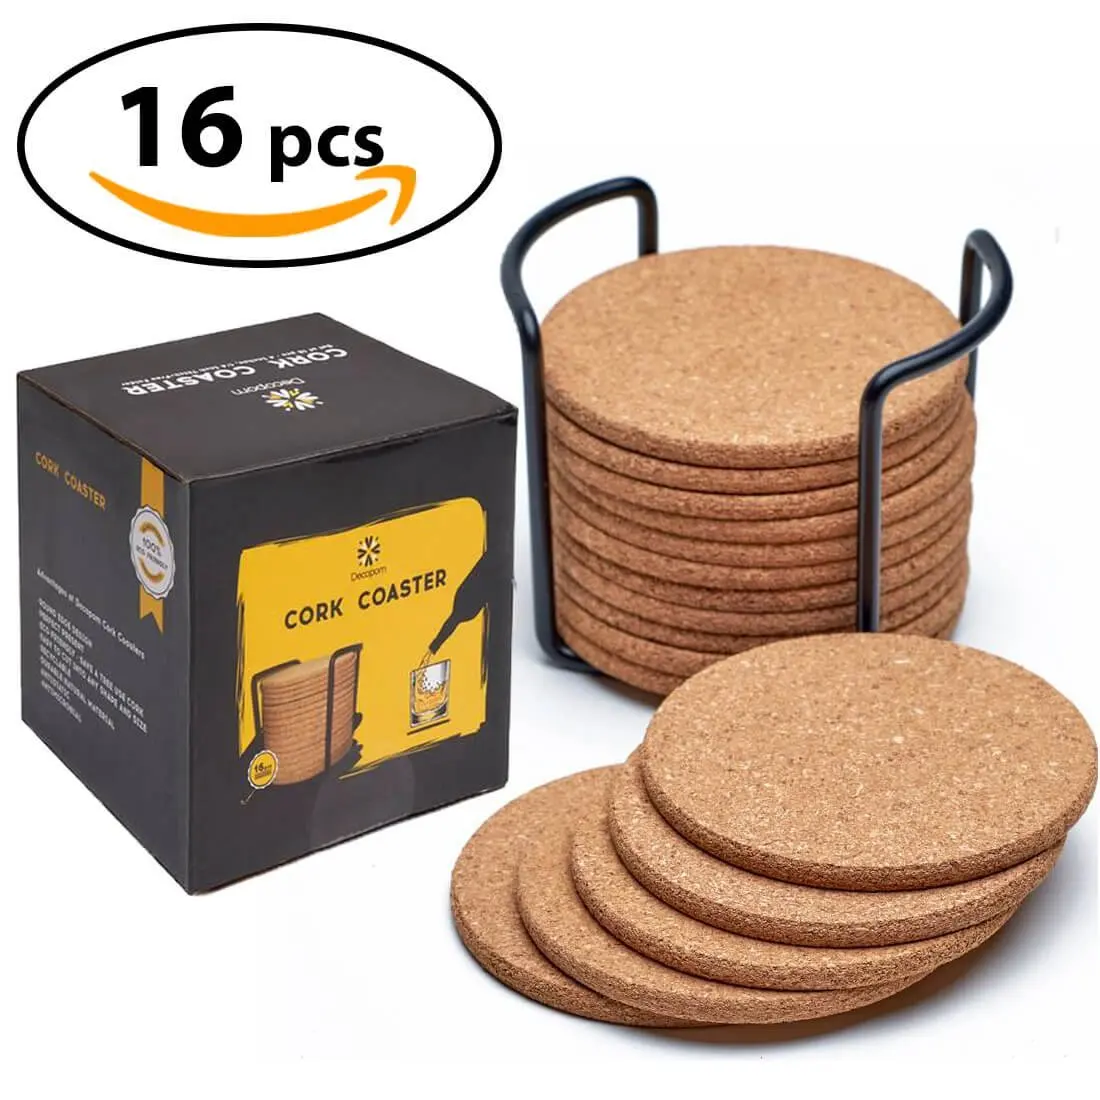 Coaster Caddy Holds 4  4 1/4 Inch Cork or Ceramic Coasters